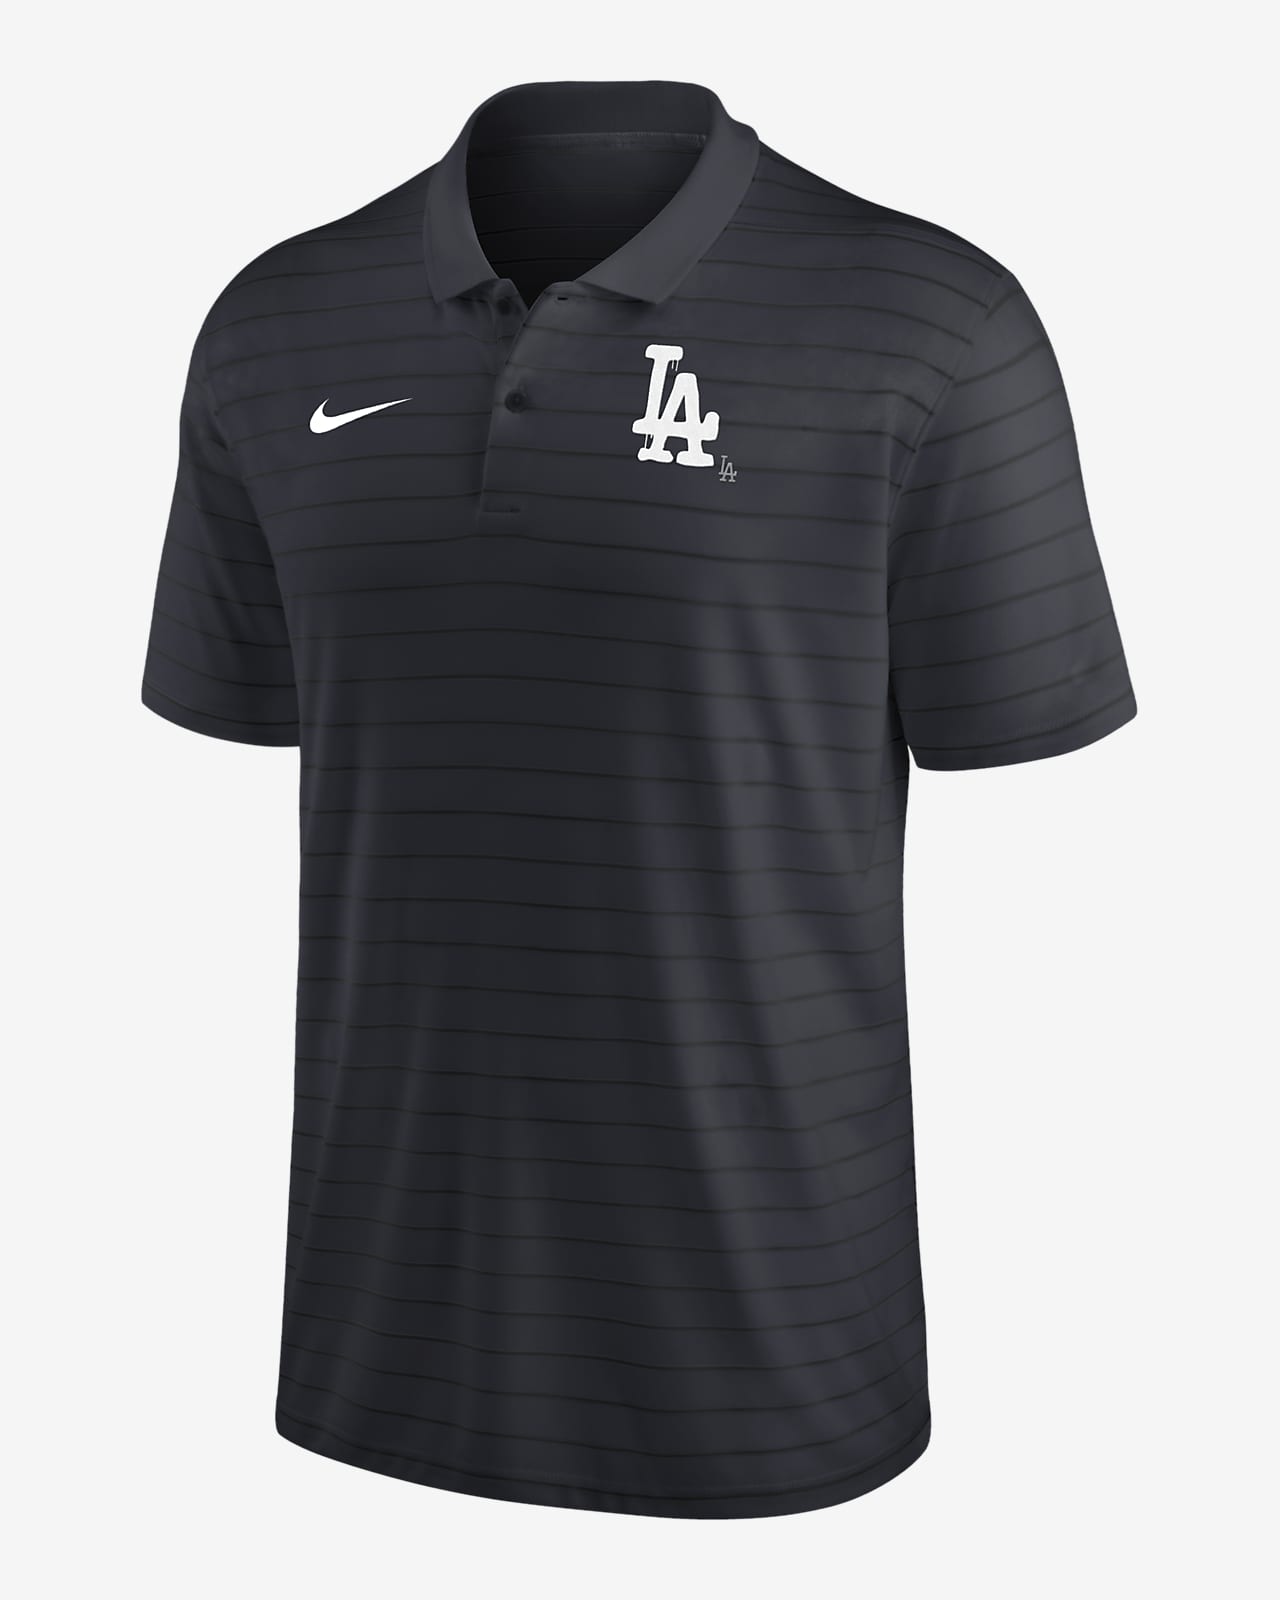 NEW NIKE Los Angeles DODGERS Polo Shirt SIZE XL India